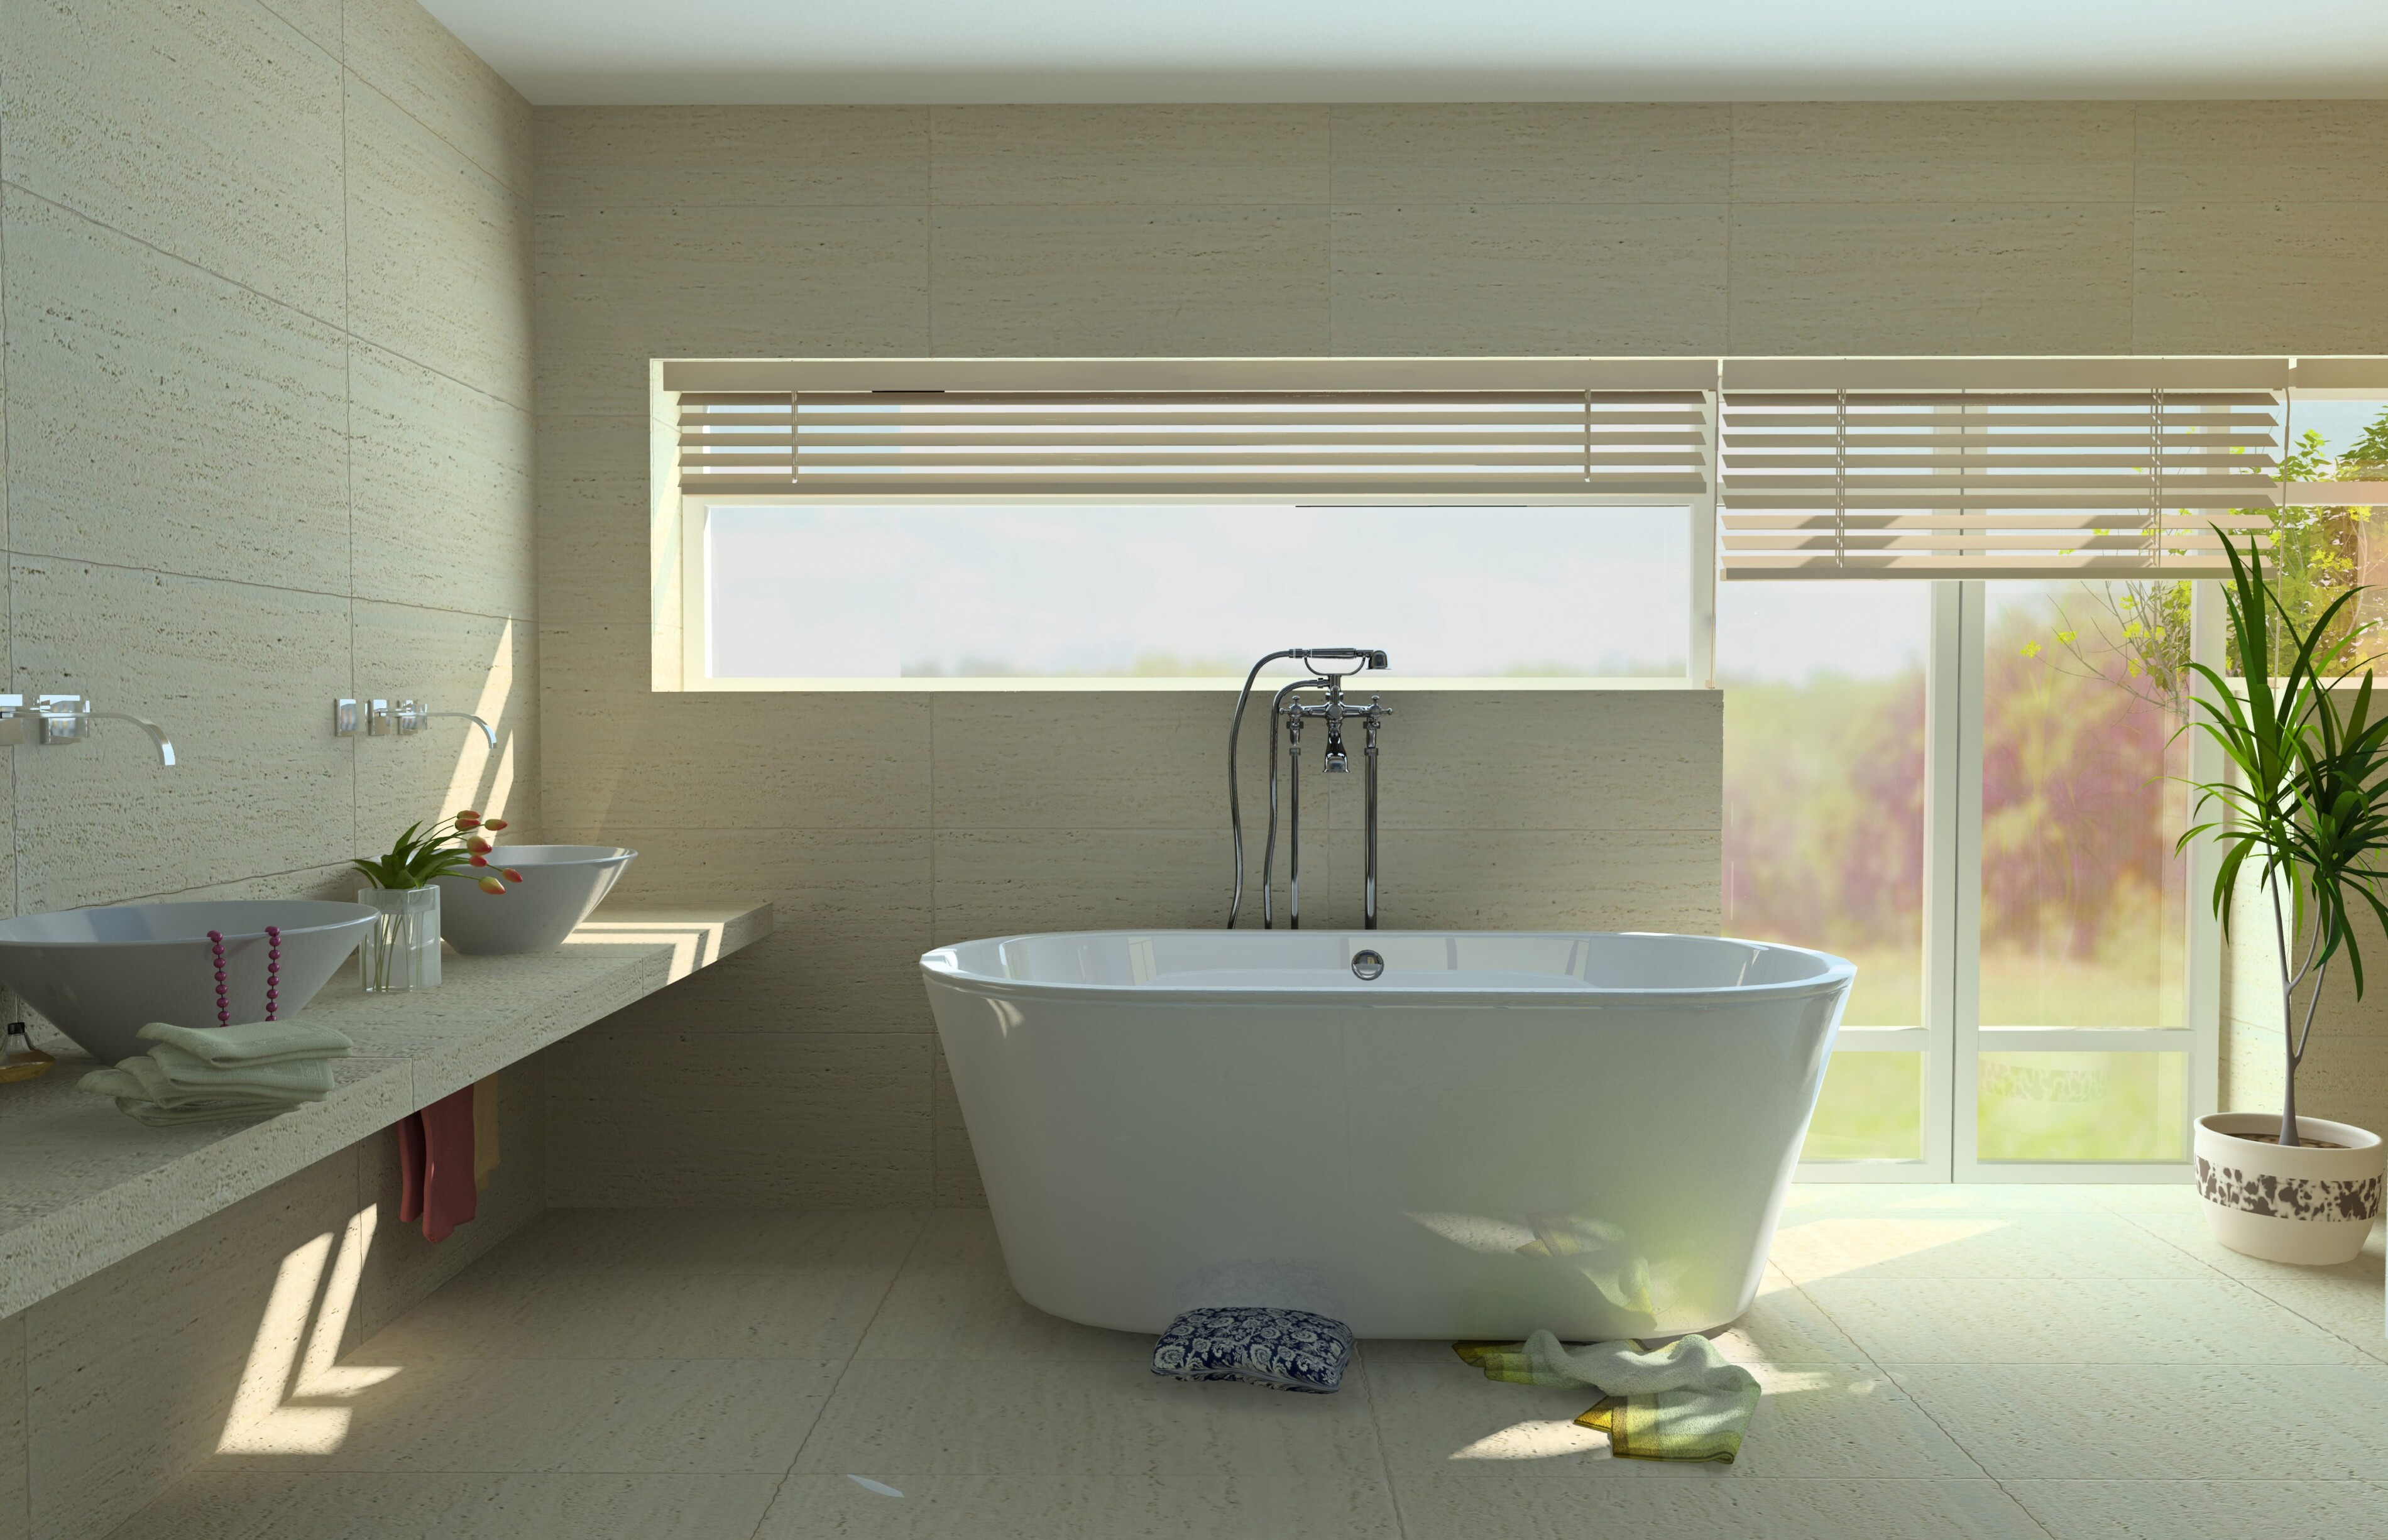 3 Must Do Bathroom Improvements to Make Before You Sell